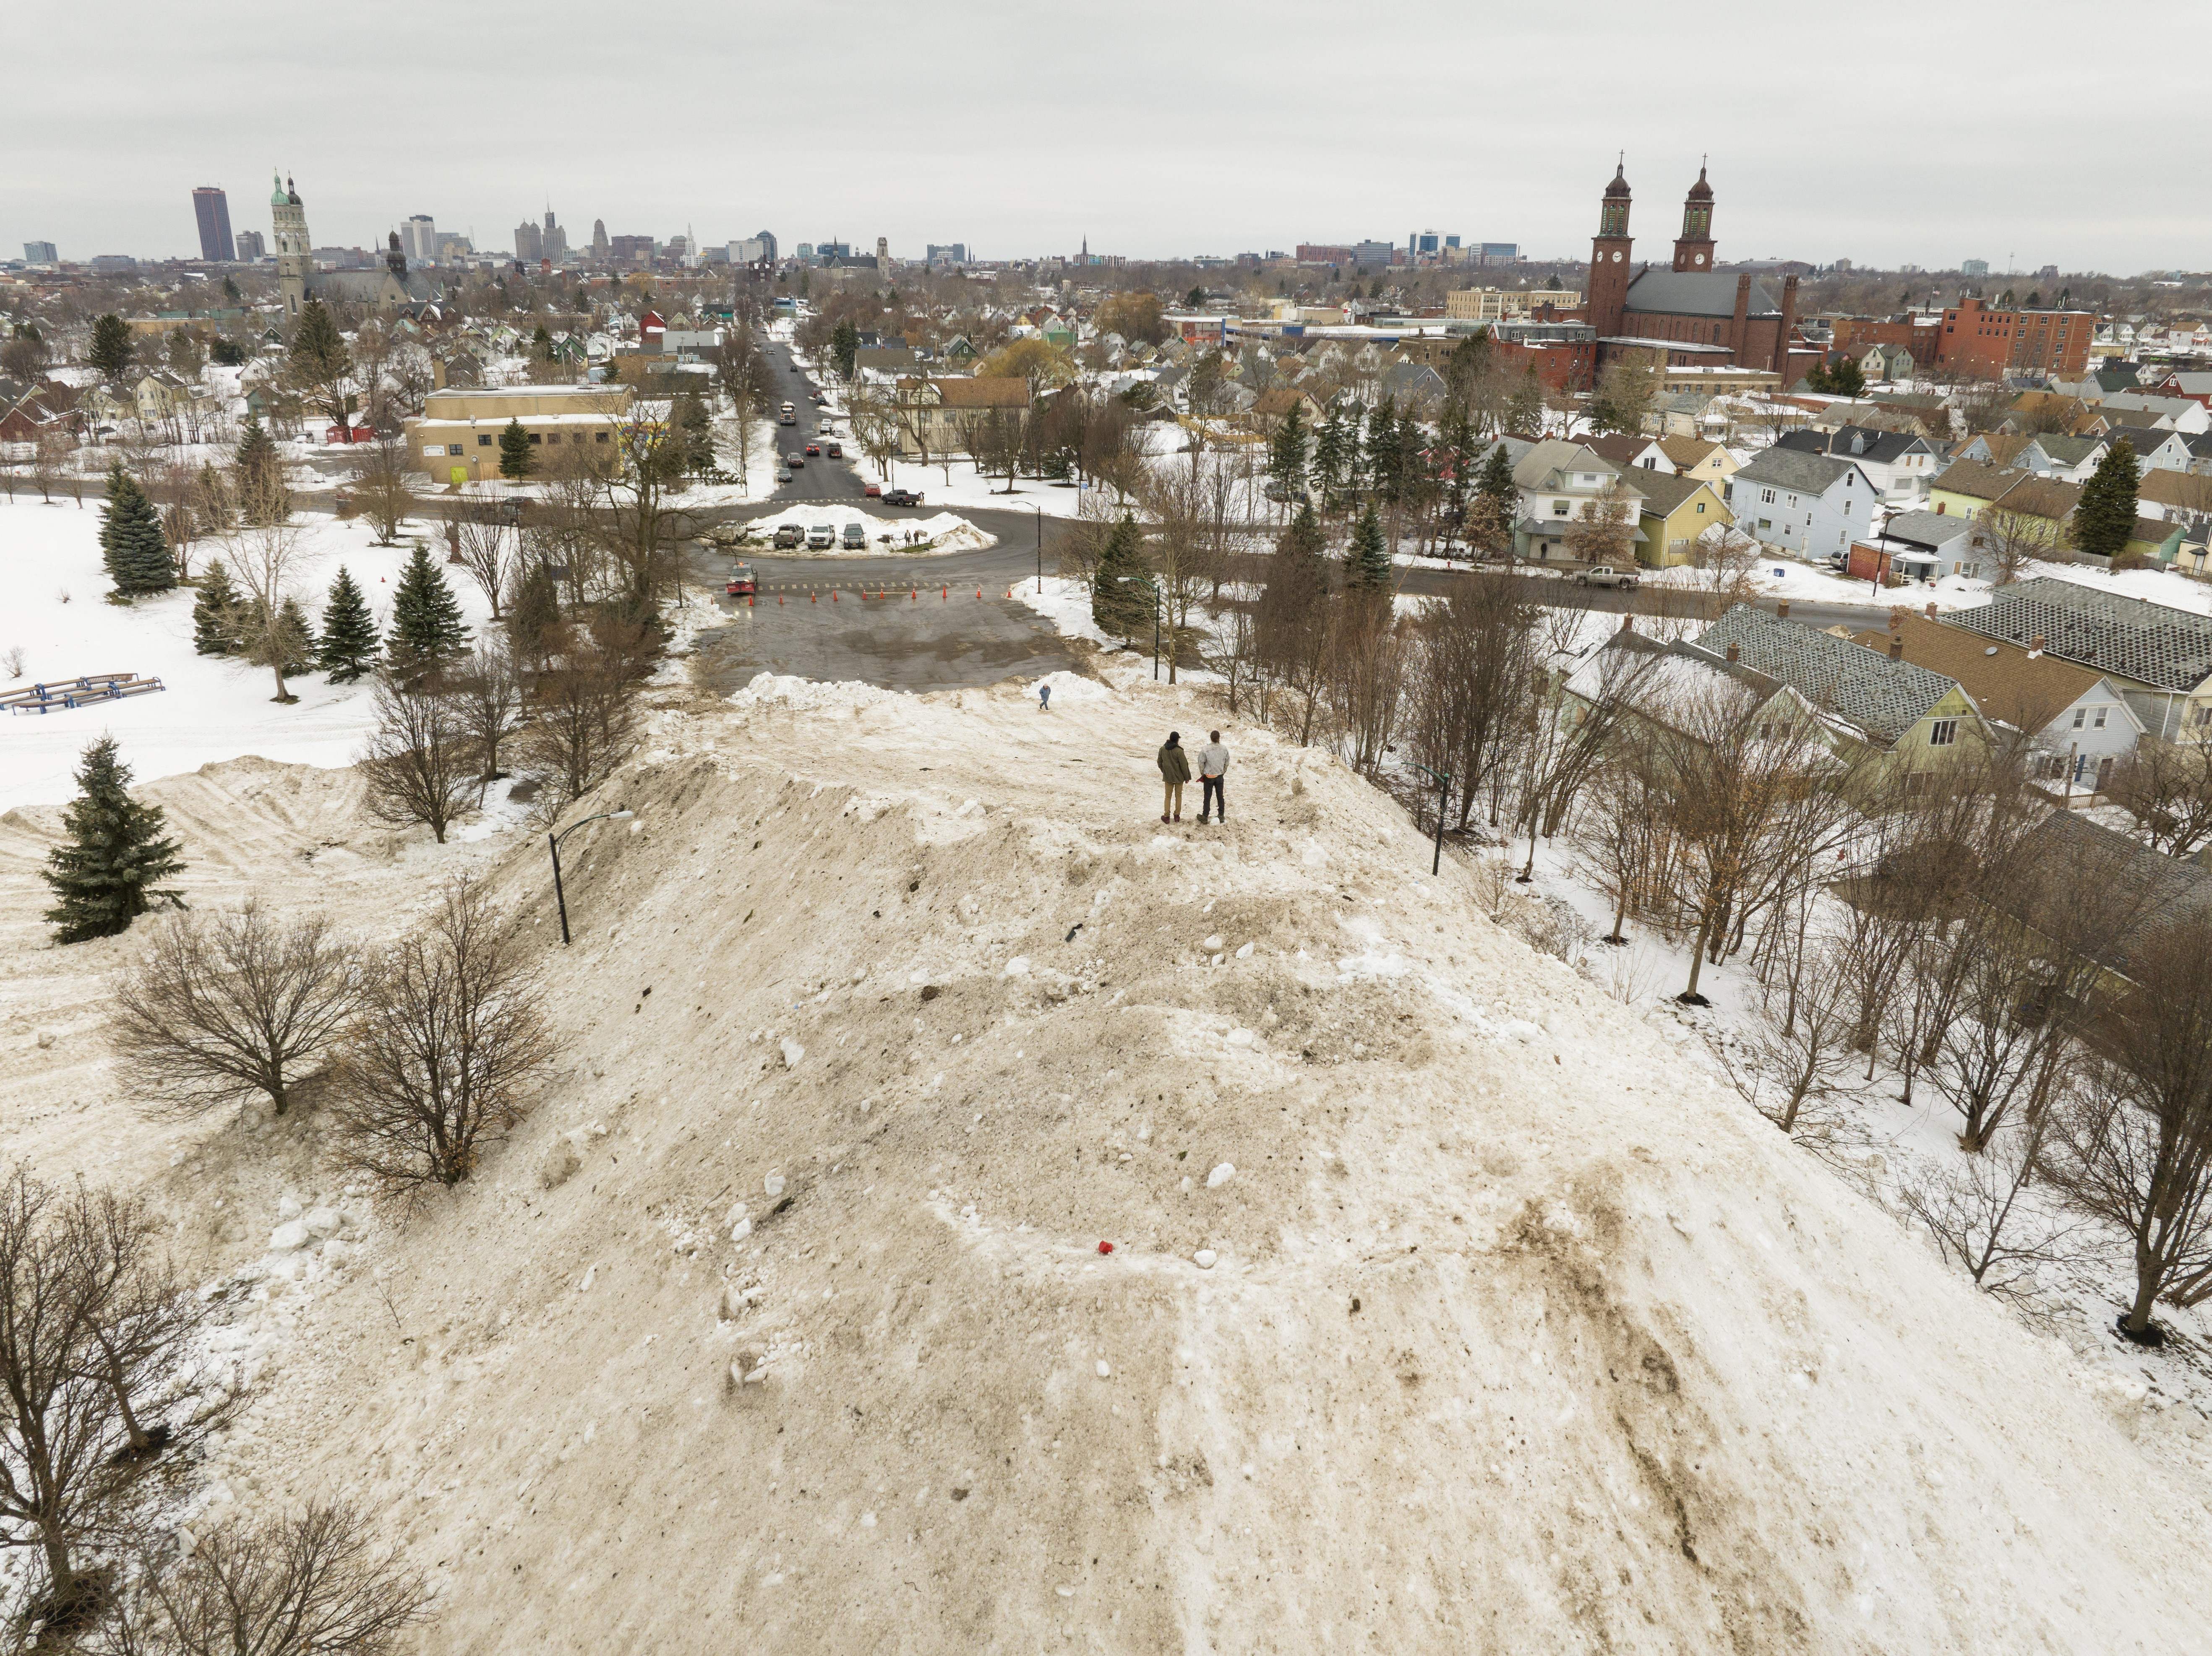 Residents take in the view from atop a gigantic snow pile in front of Central Terminal in Buffalo, New York, on December 29, 2022.